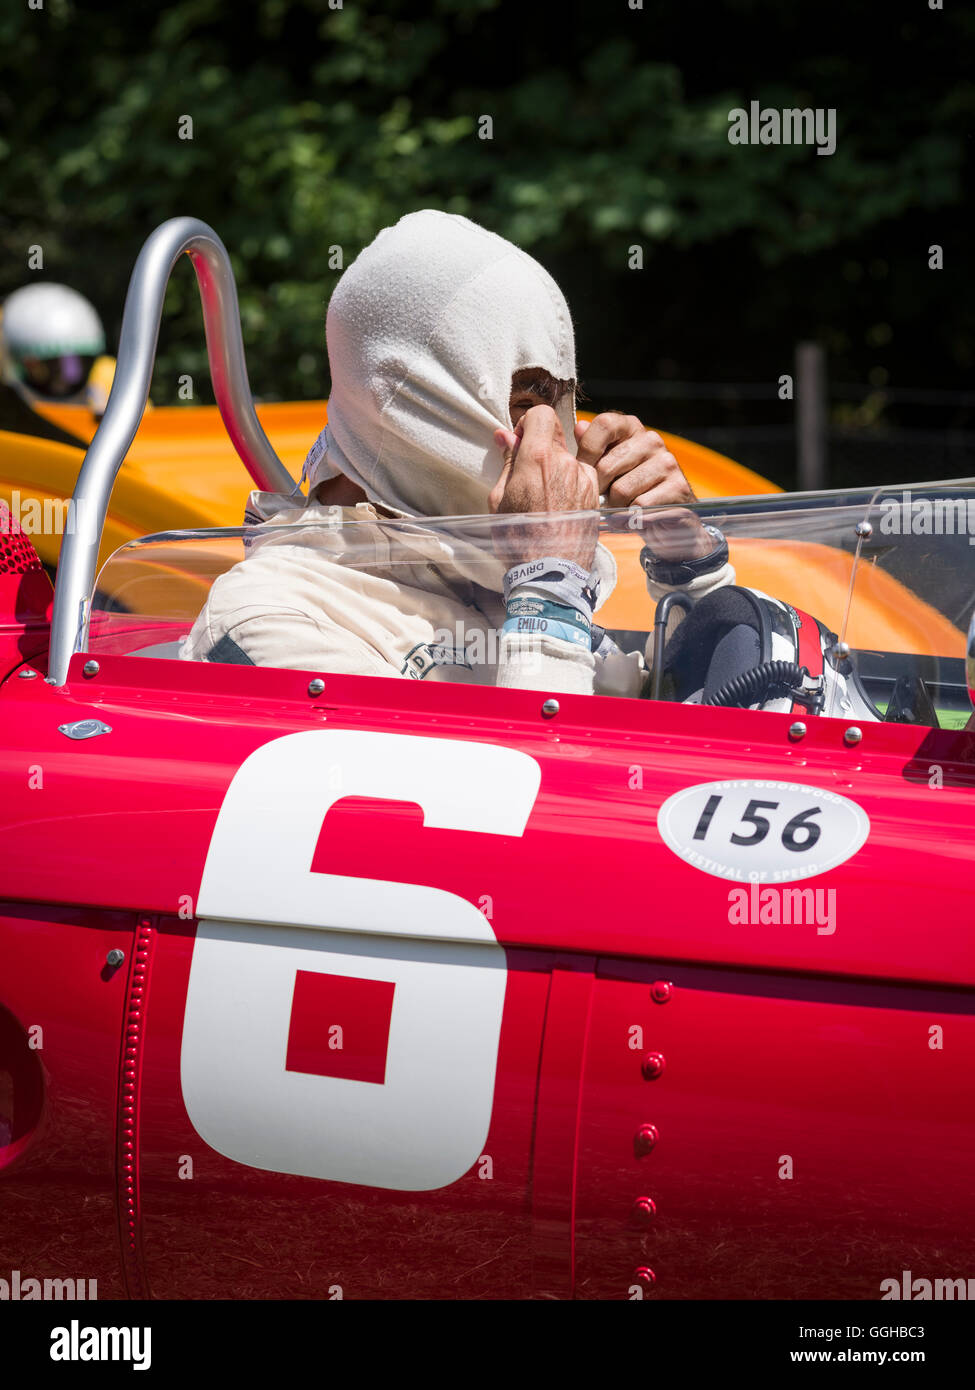 Emanuel Pirro, five times winner of Le Mans, 1961 Ferrari 156 Sharknose, Goodwood Festival of Speed 2014, racing, car racing, cl Stock Photo